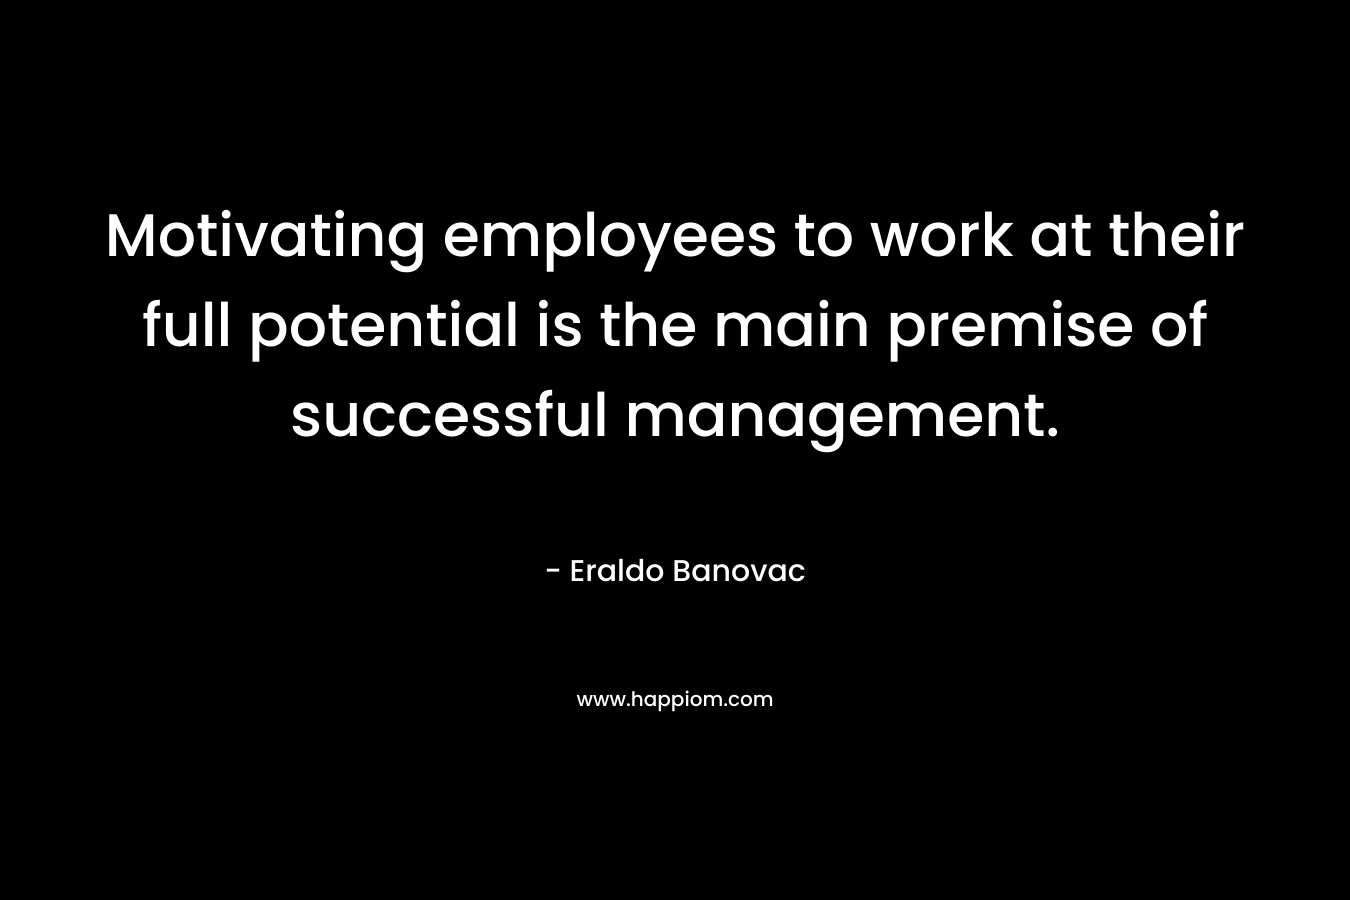 Motivating employees to work at their full potential is the main premise of successful management. – Eraldo Banovac